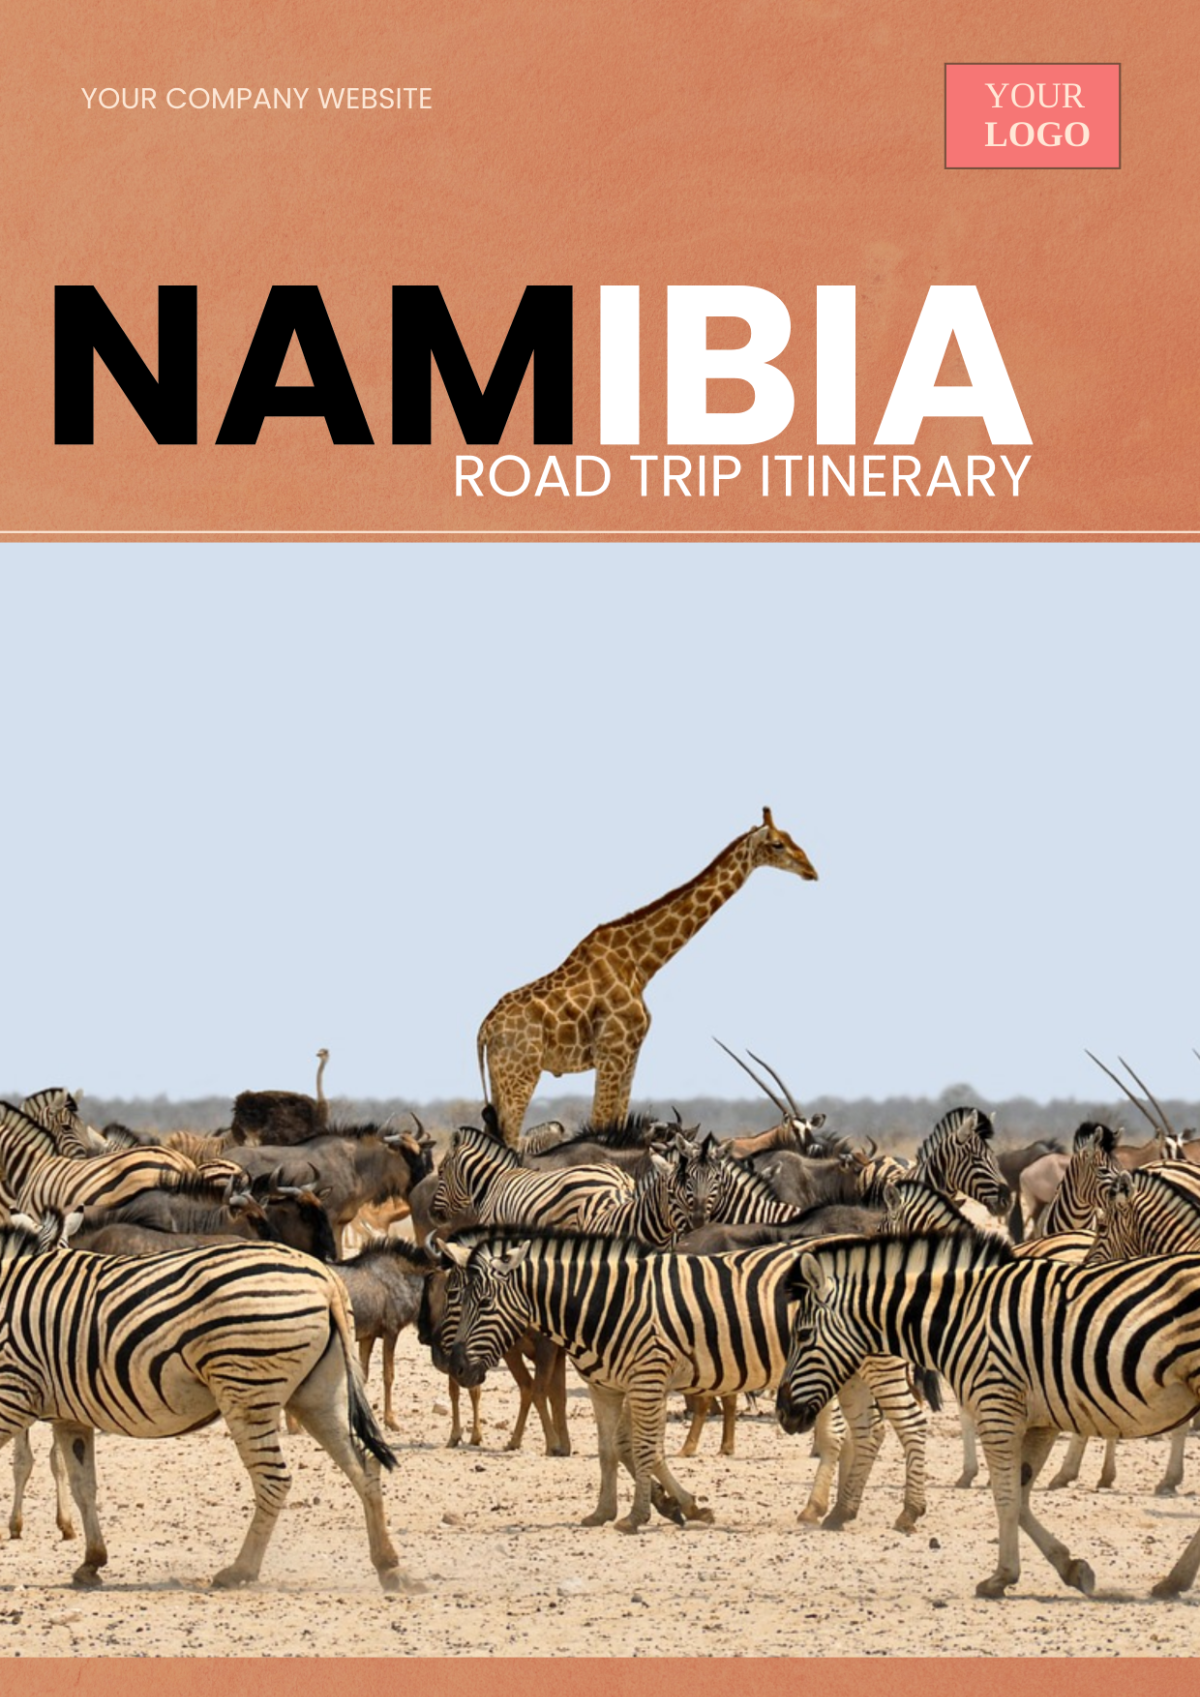 Namibia Road Trip Itinerary Template